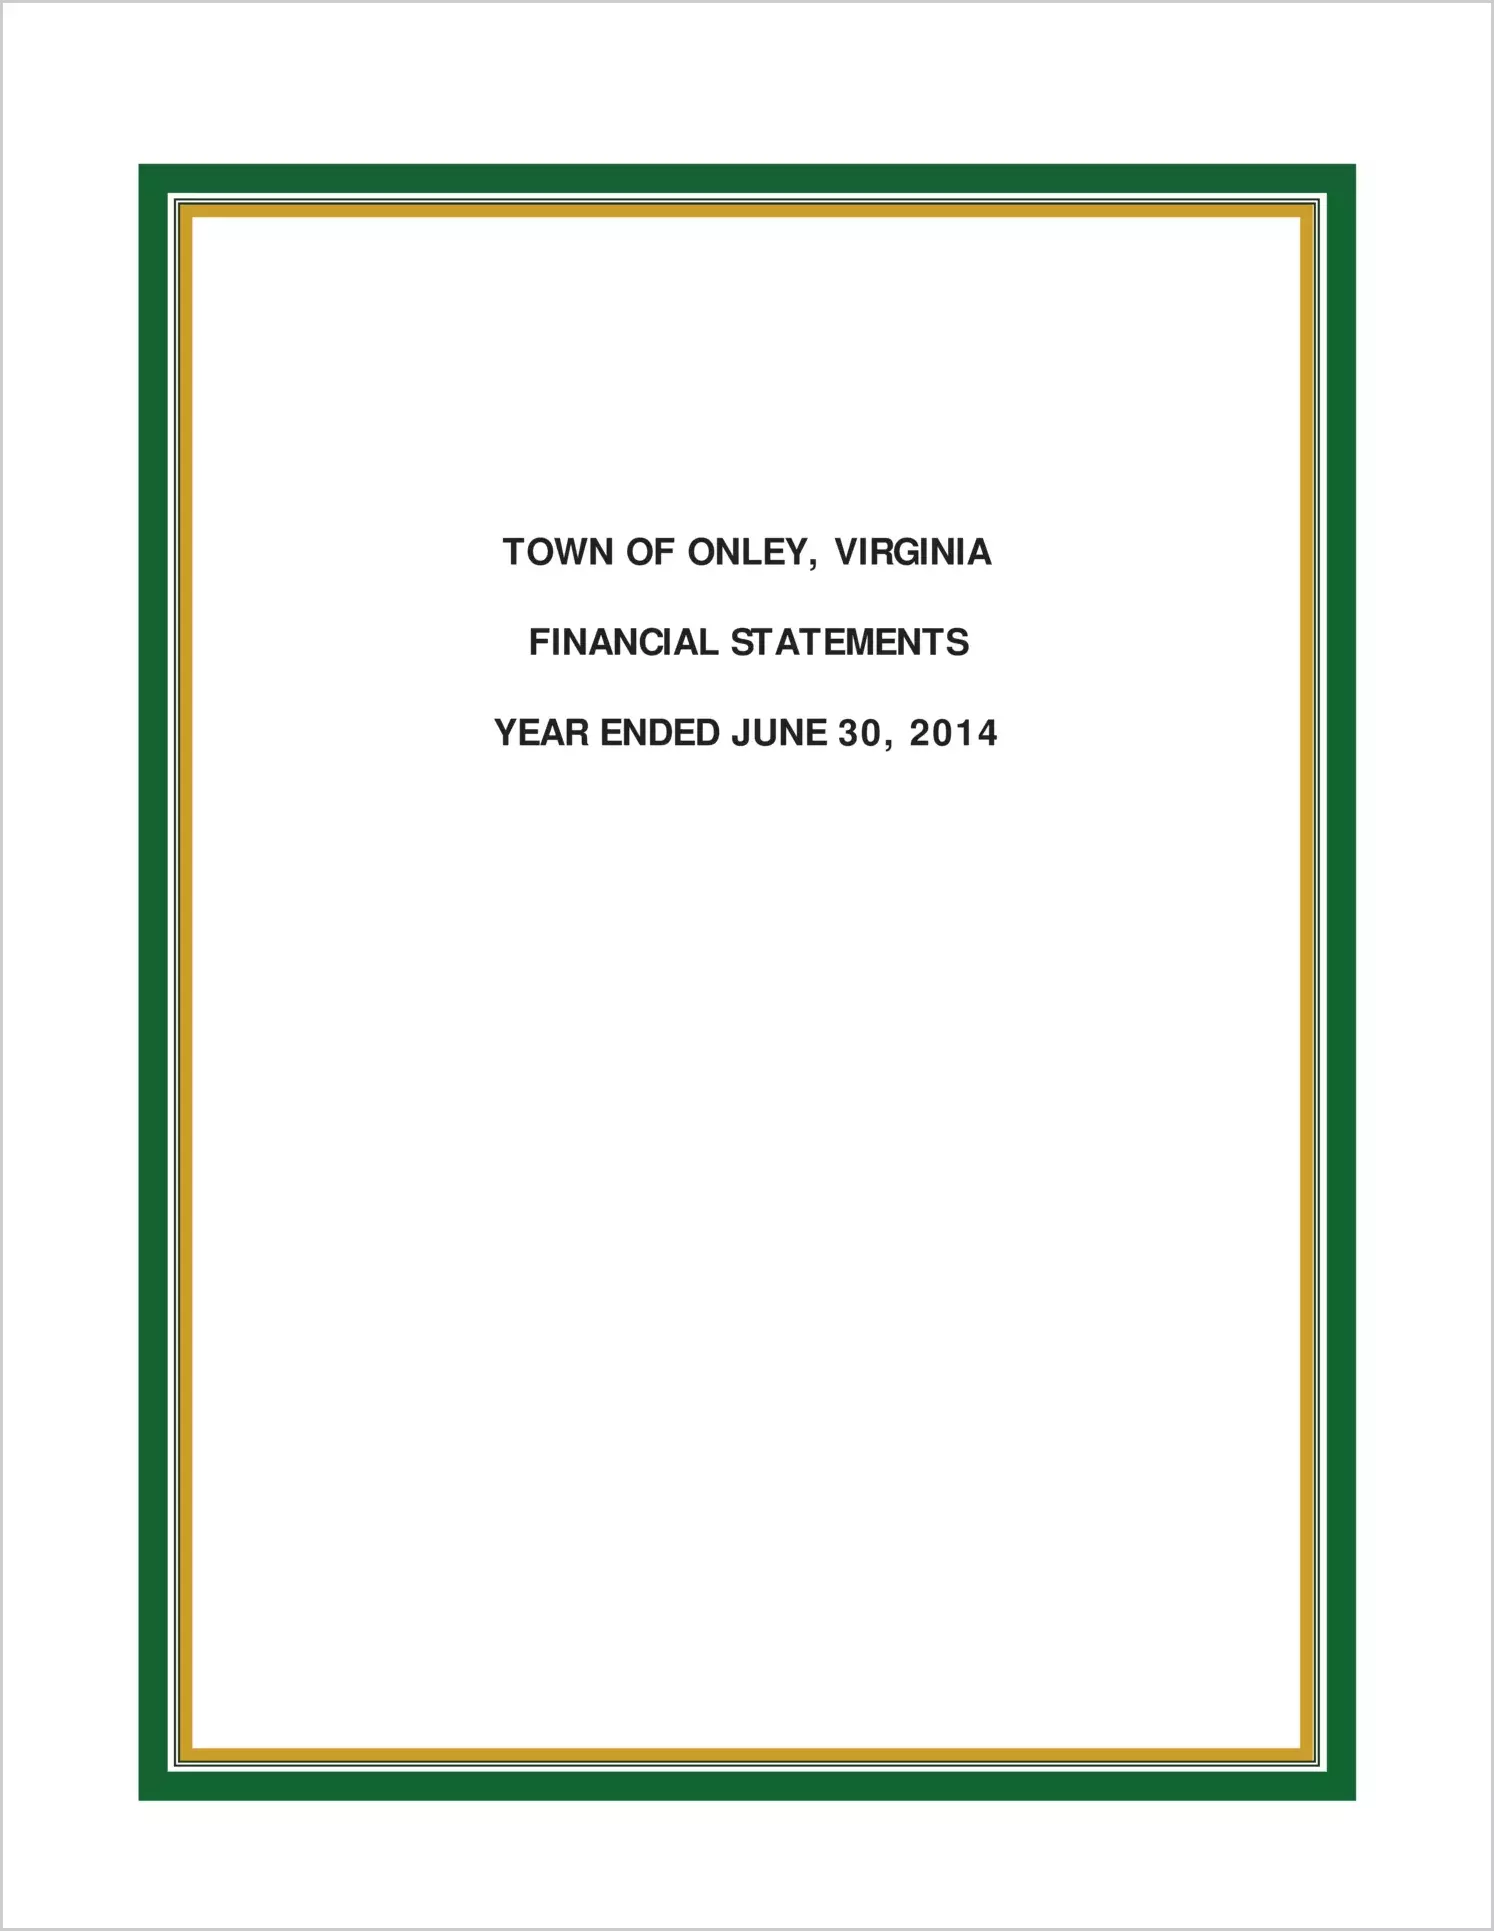 2014 Annual Financial Report for Town of Onley